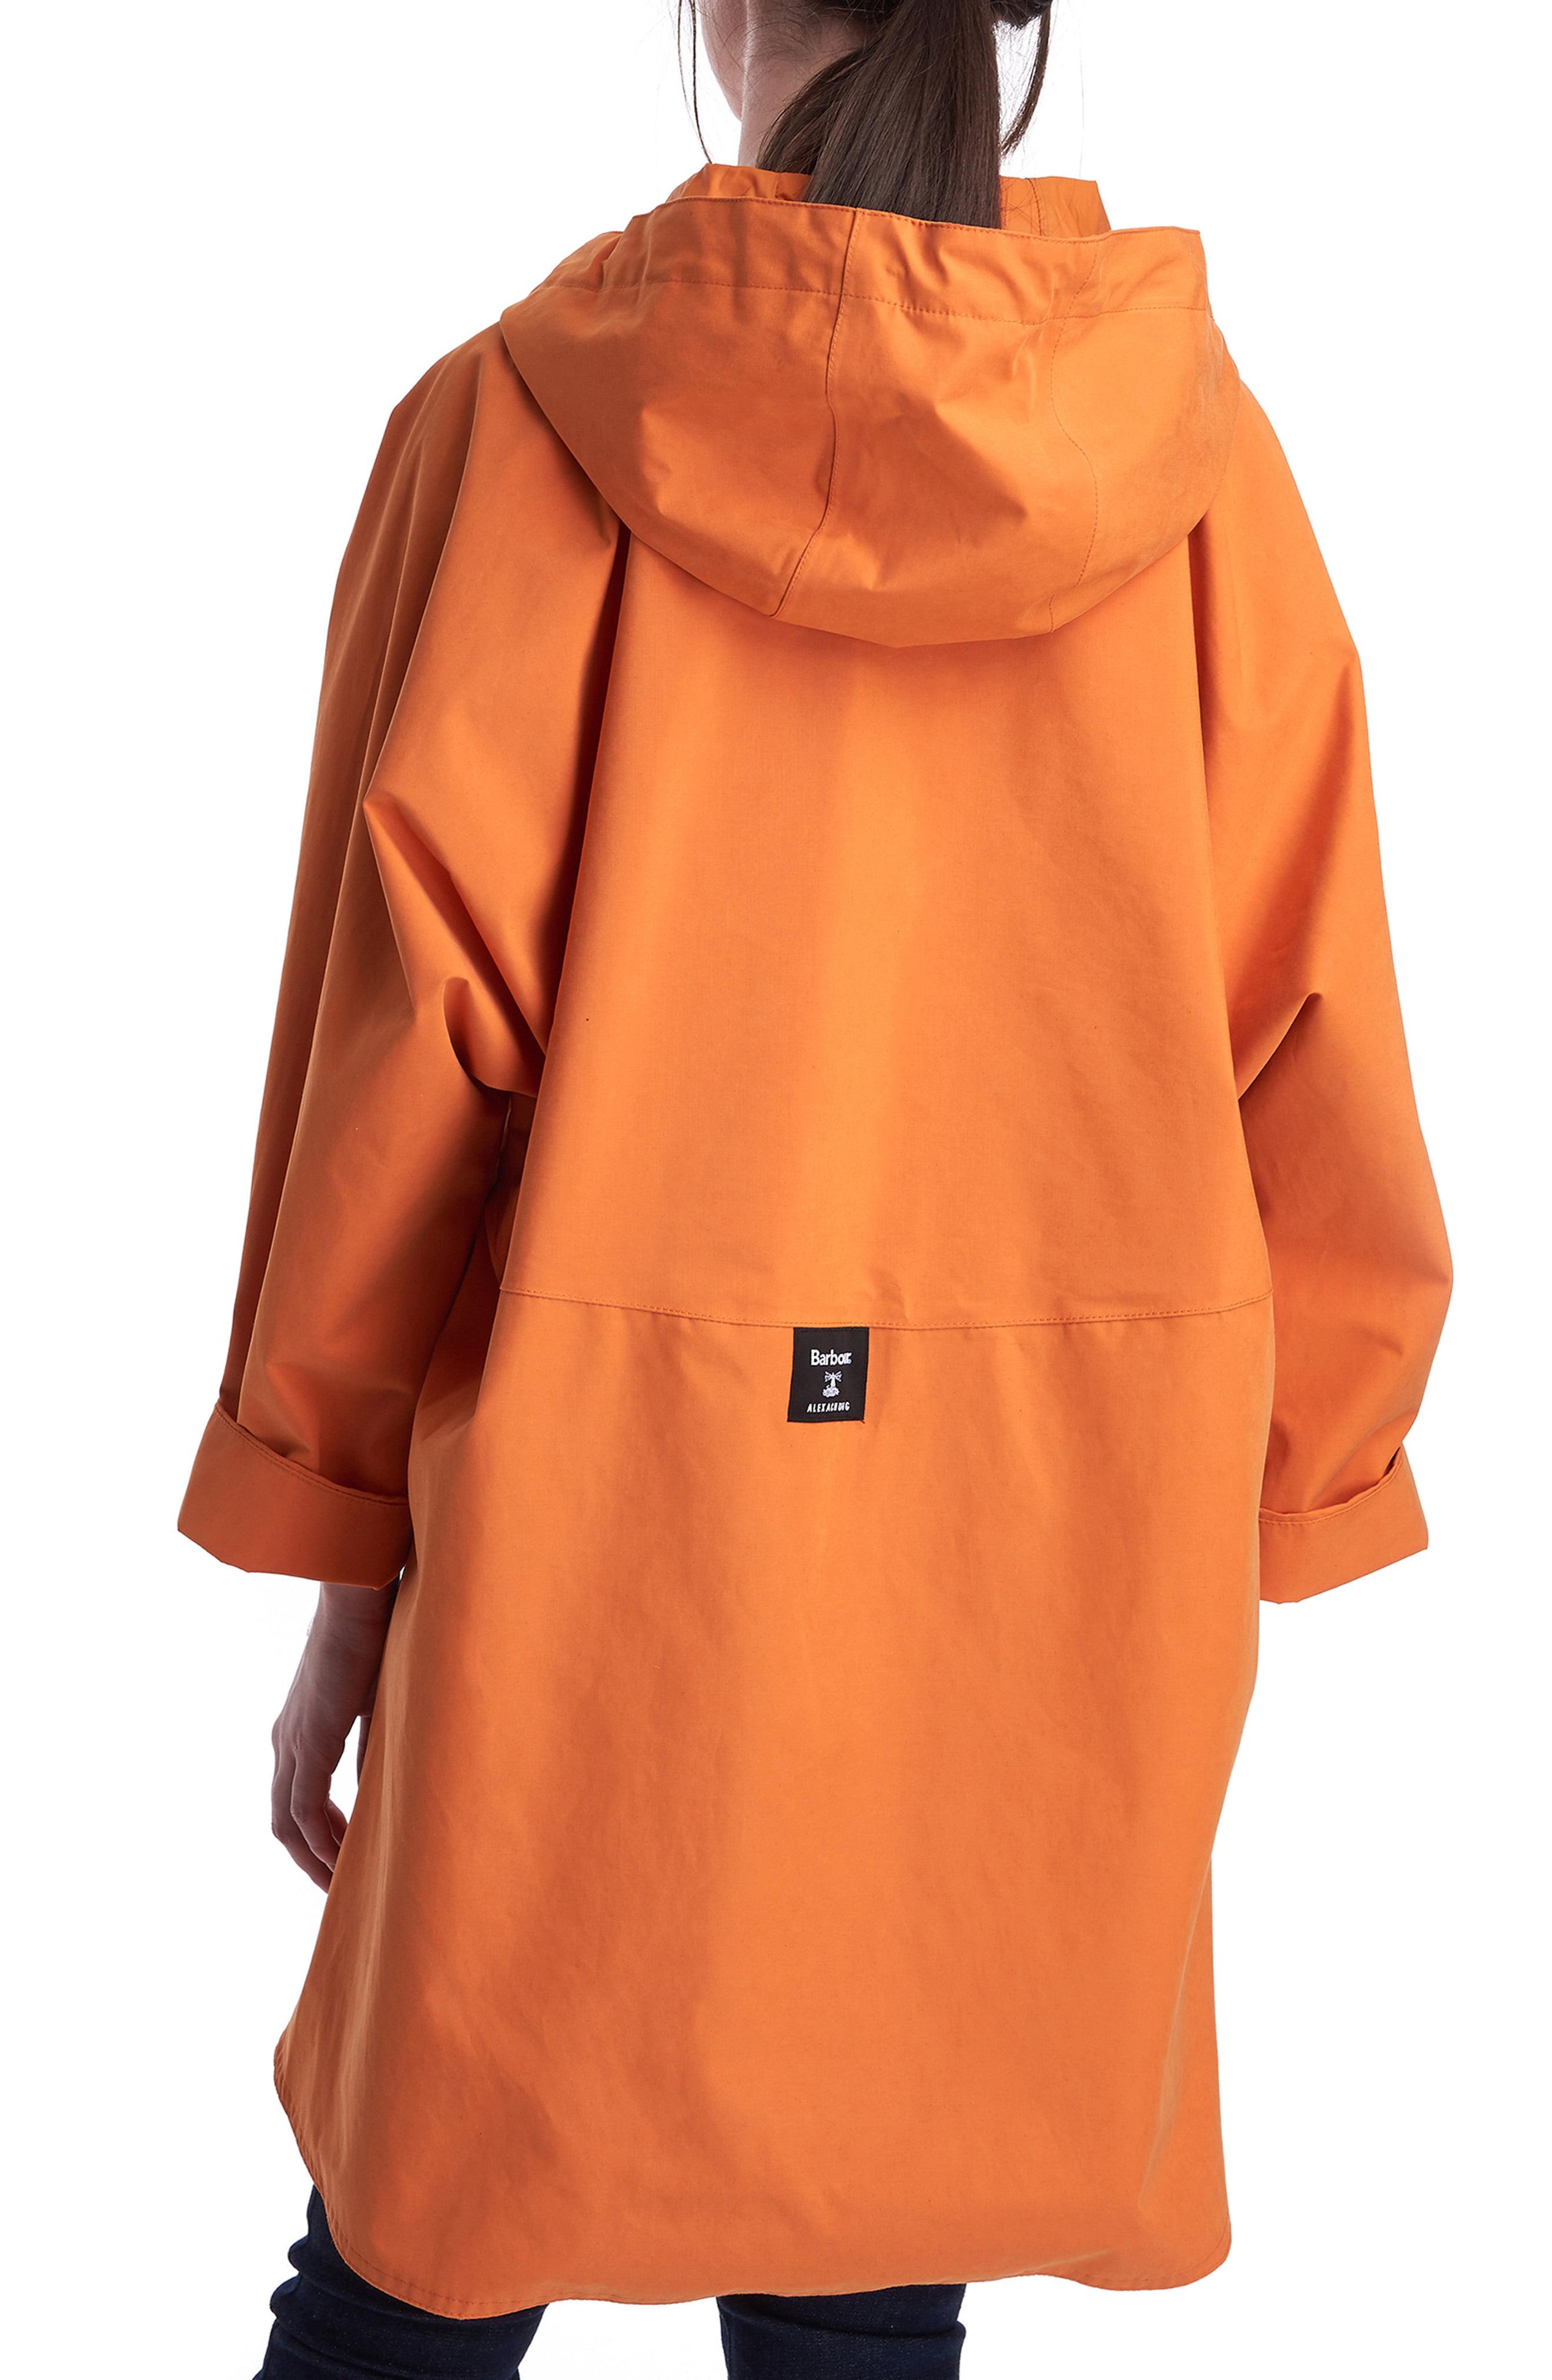 Barbour By Alexachung Pip Poncho Jacket in Marigold (Orange) | Lyst